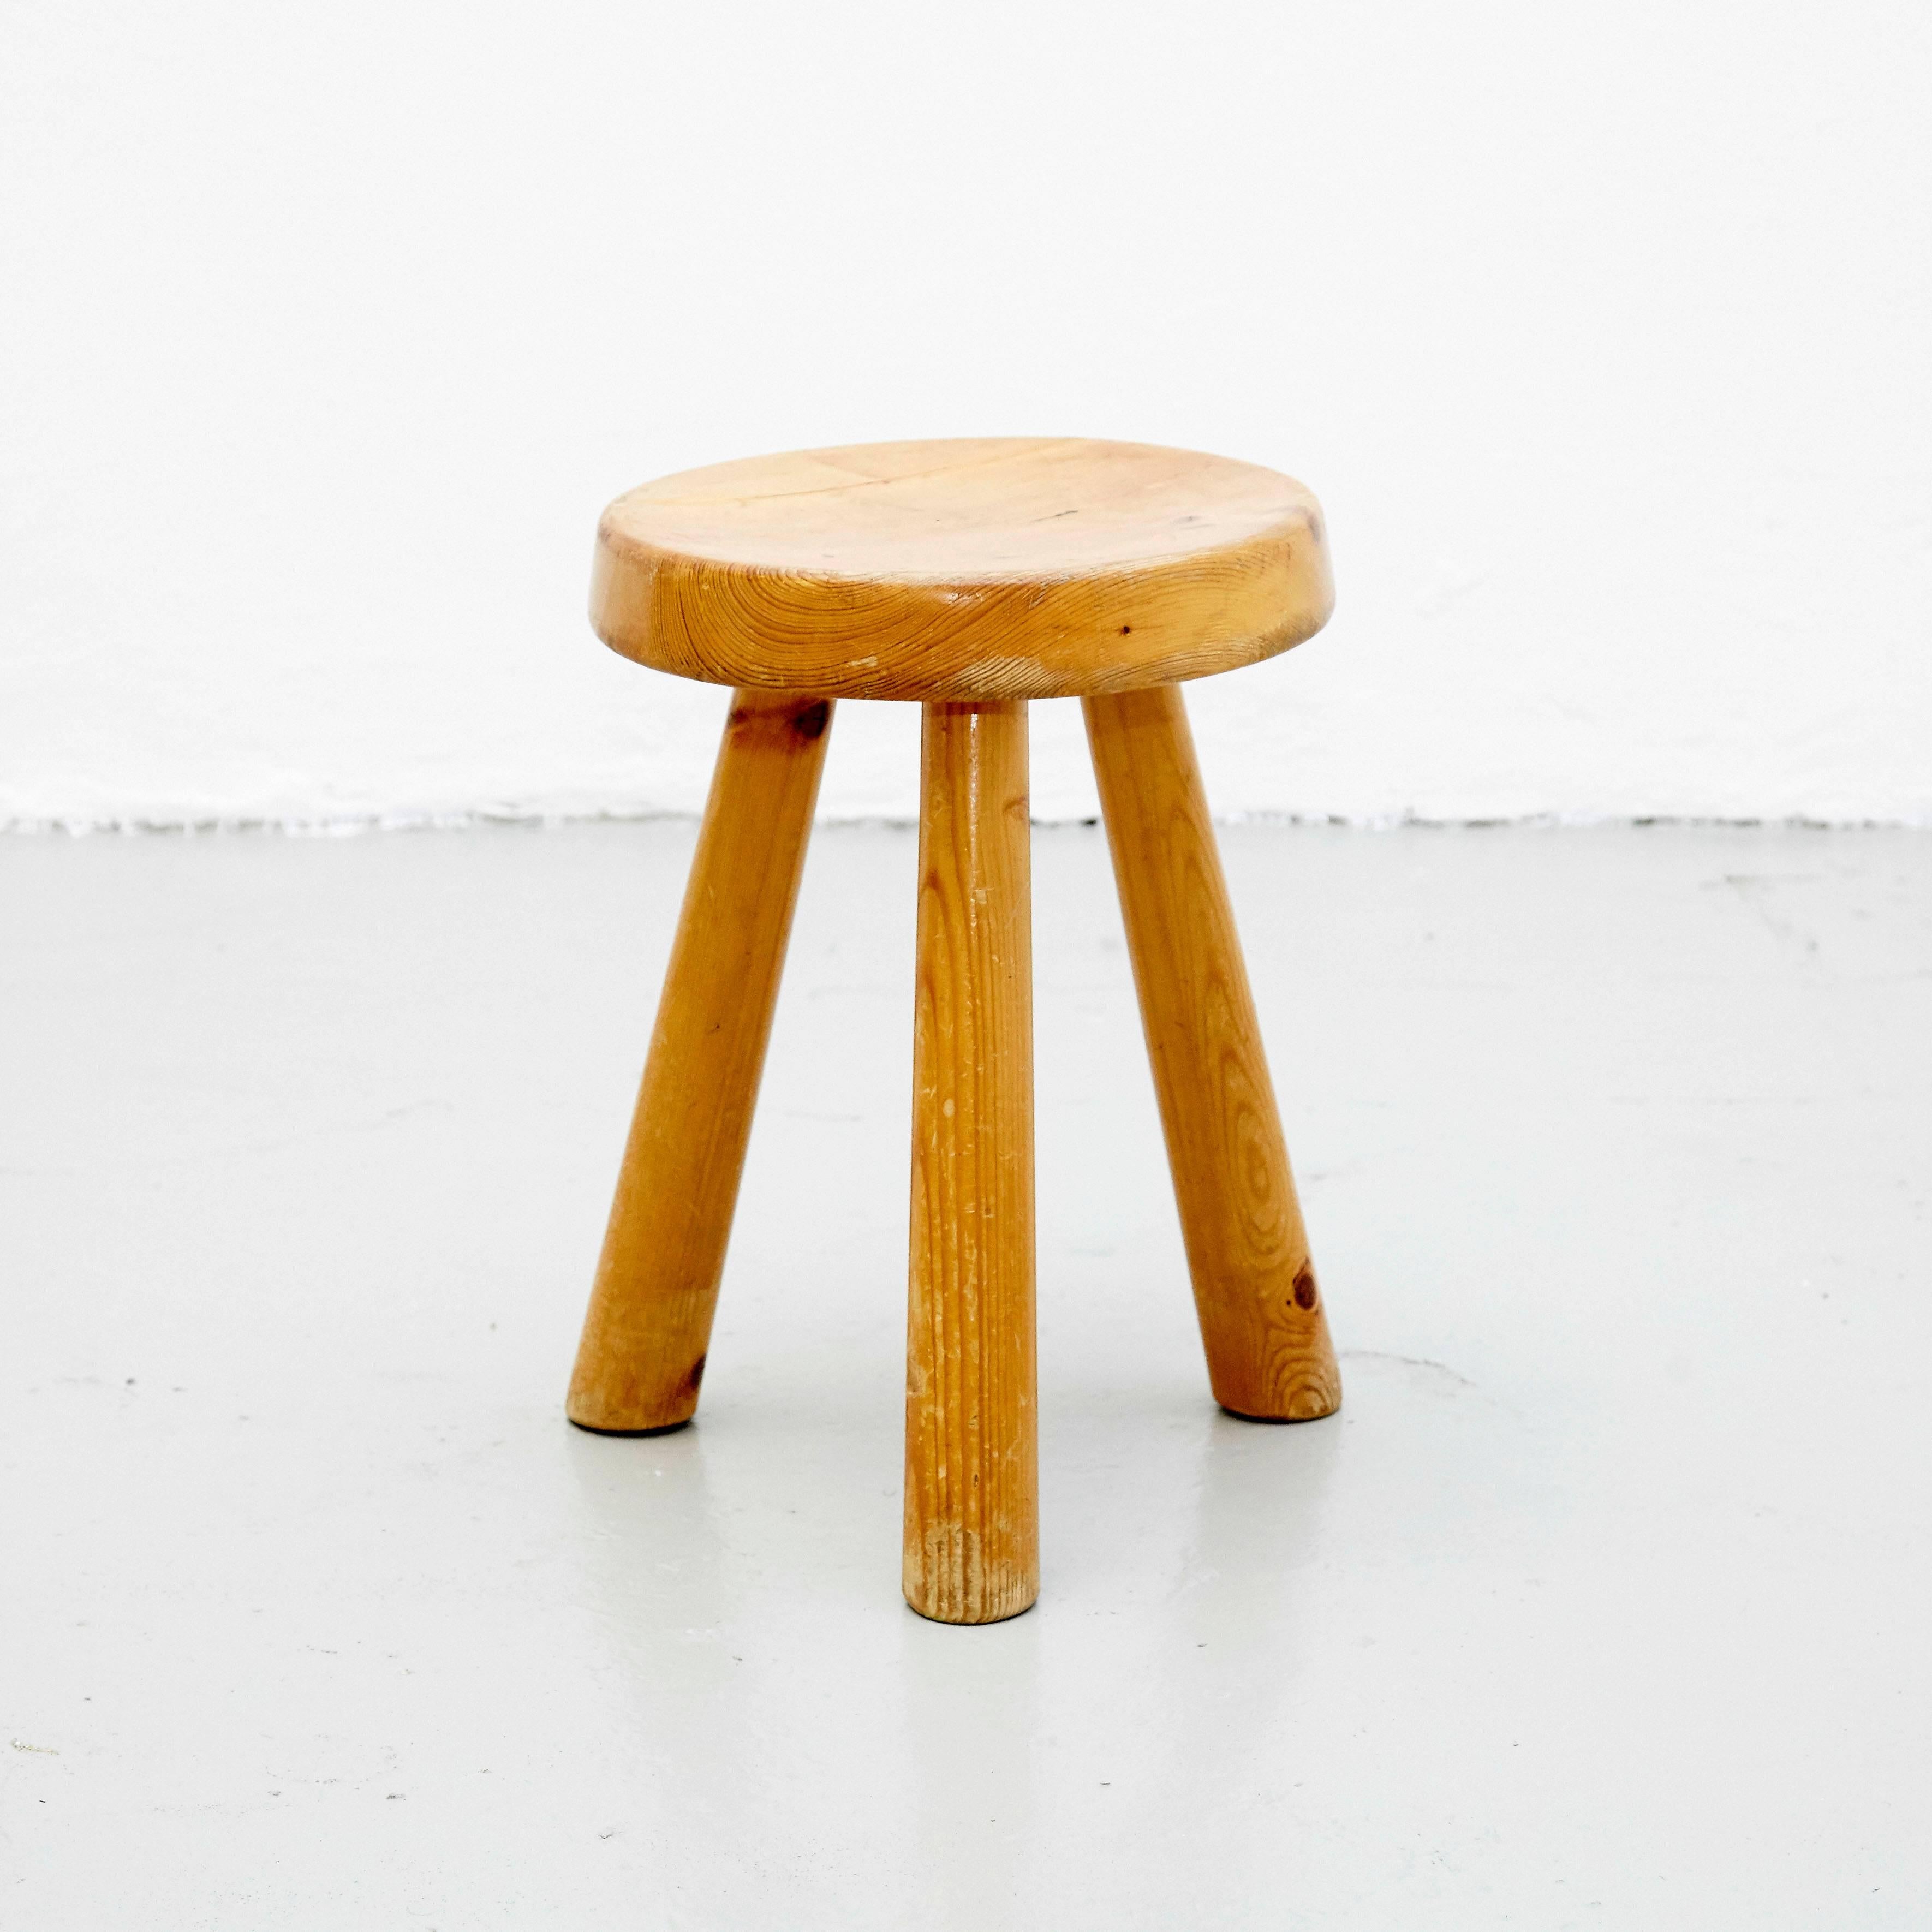 Stool designed by Charlotte Perriand around 1960 for Les Arcs.
Manufactured in France.
Lacquered metal base, pine wood seat.

In good original condition, preserving a beautiful patina. It has a restauration from the legs as shown in the